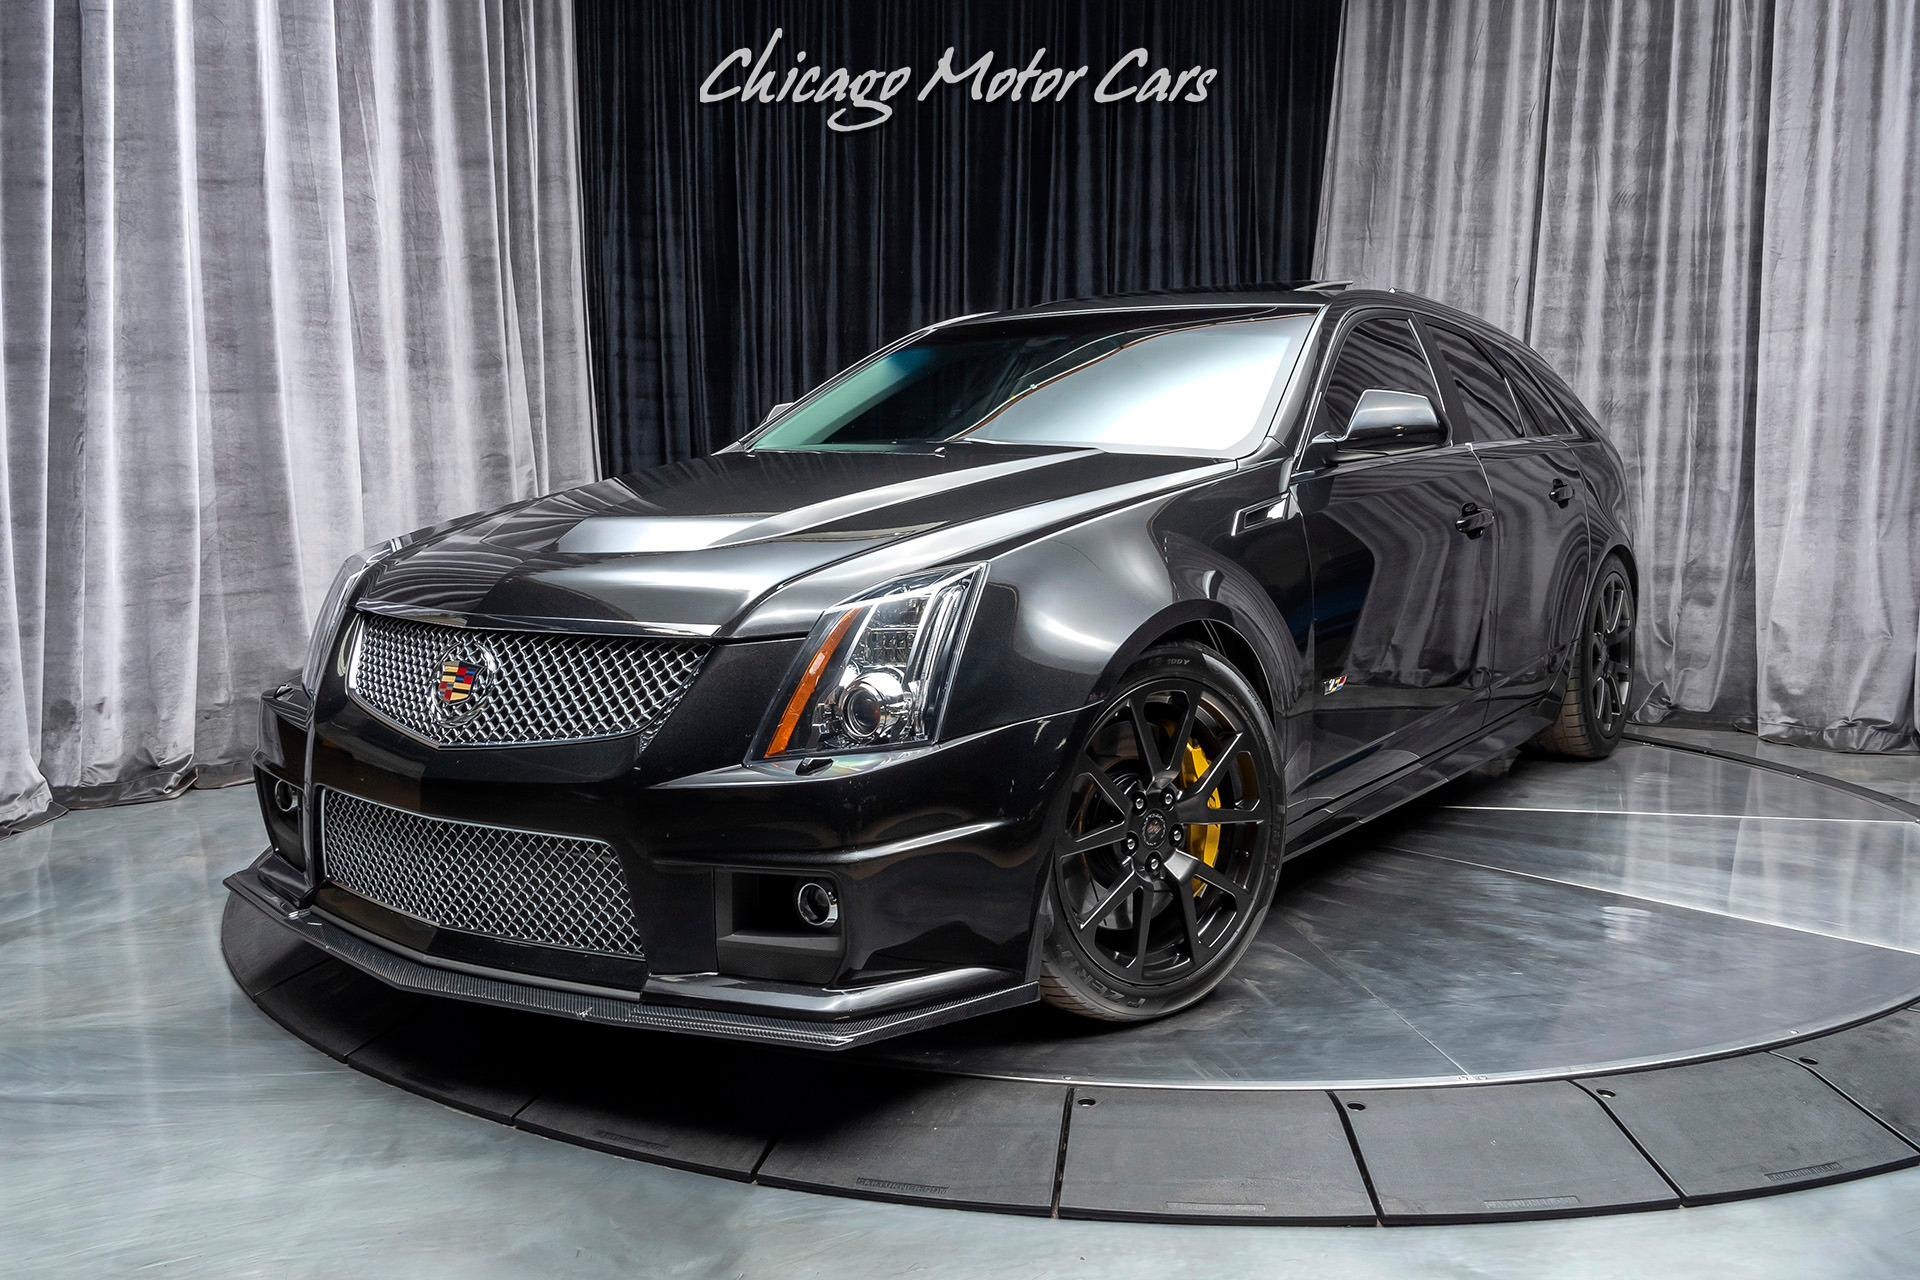 Used-2012-Cadillac-CTS-V-Wagon-750-HORSEPOWER-LOADED-WITH-15K-IN-UPGRADES